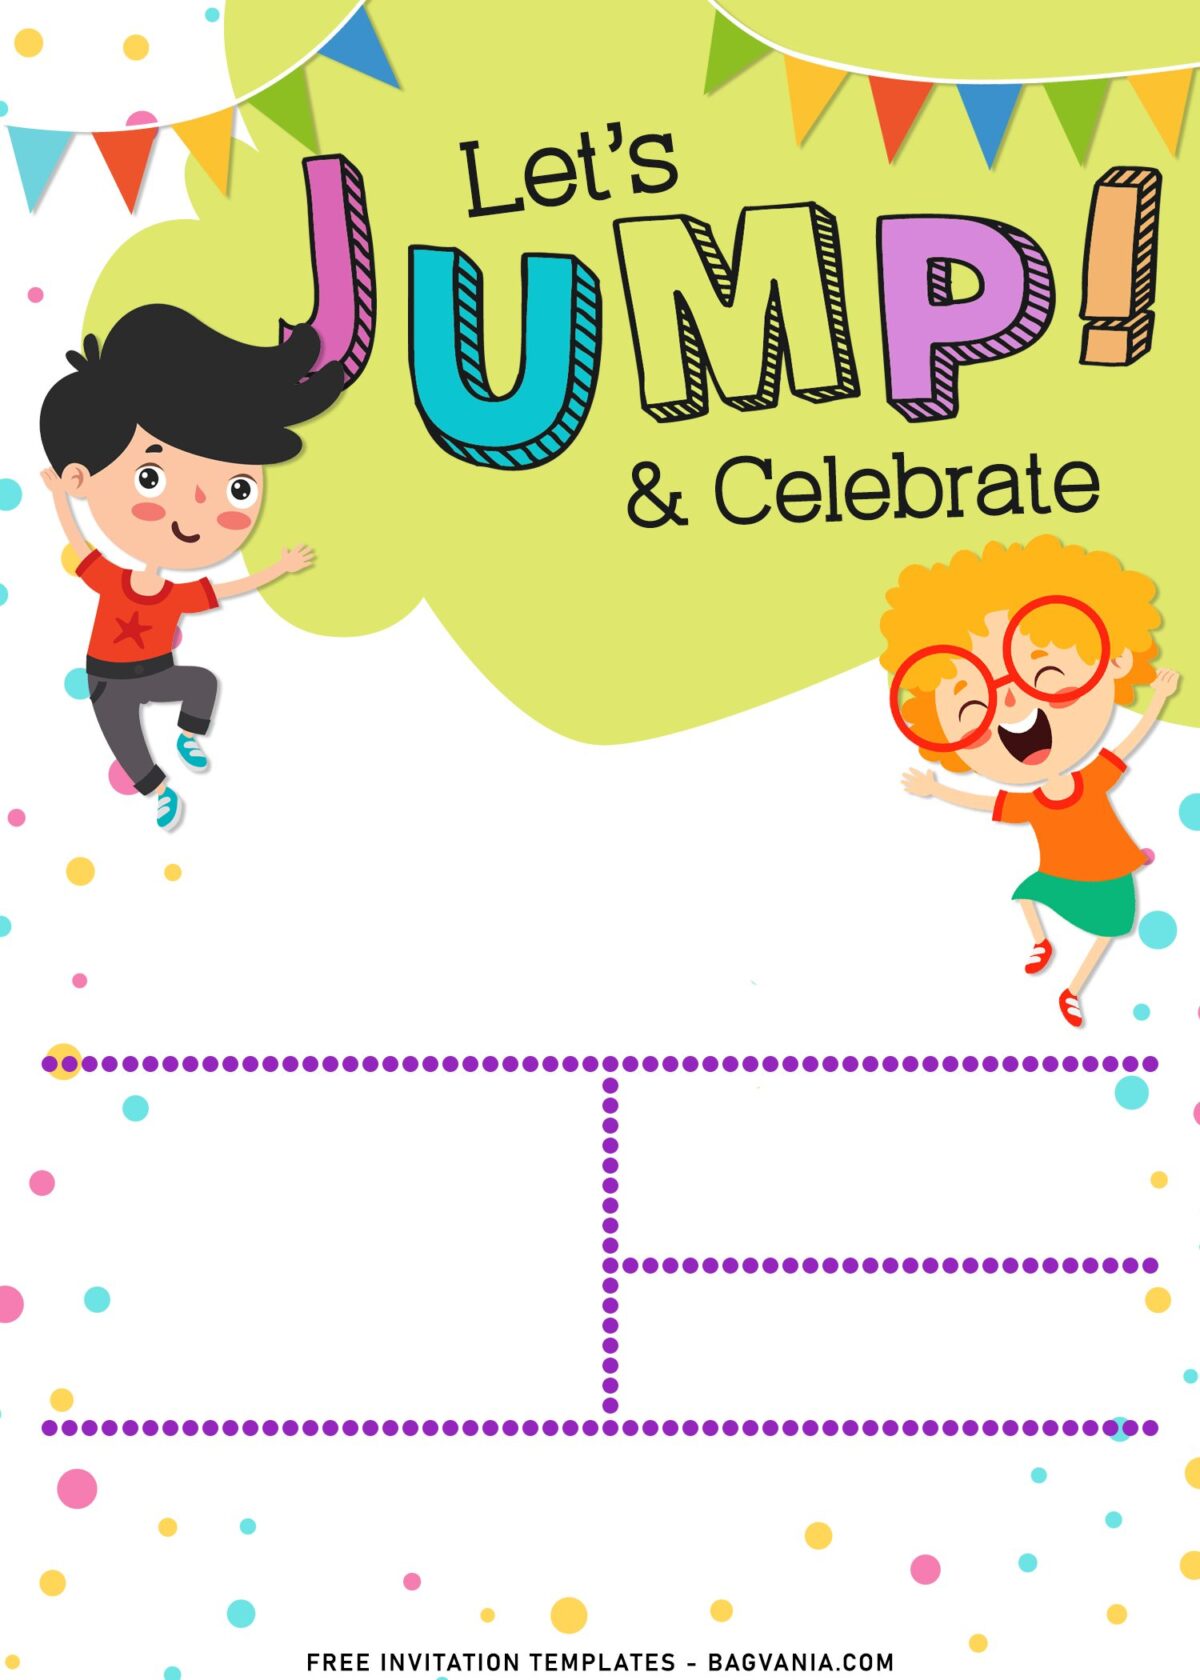 11+ Let’s Jump Party Invitation Templates For Your Kids Next Bash with colorful polka dots background